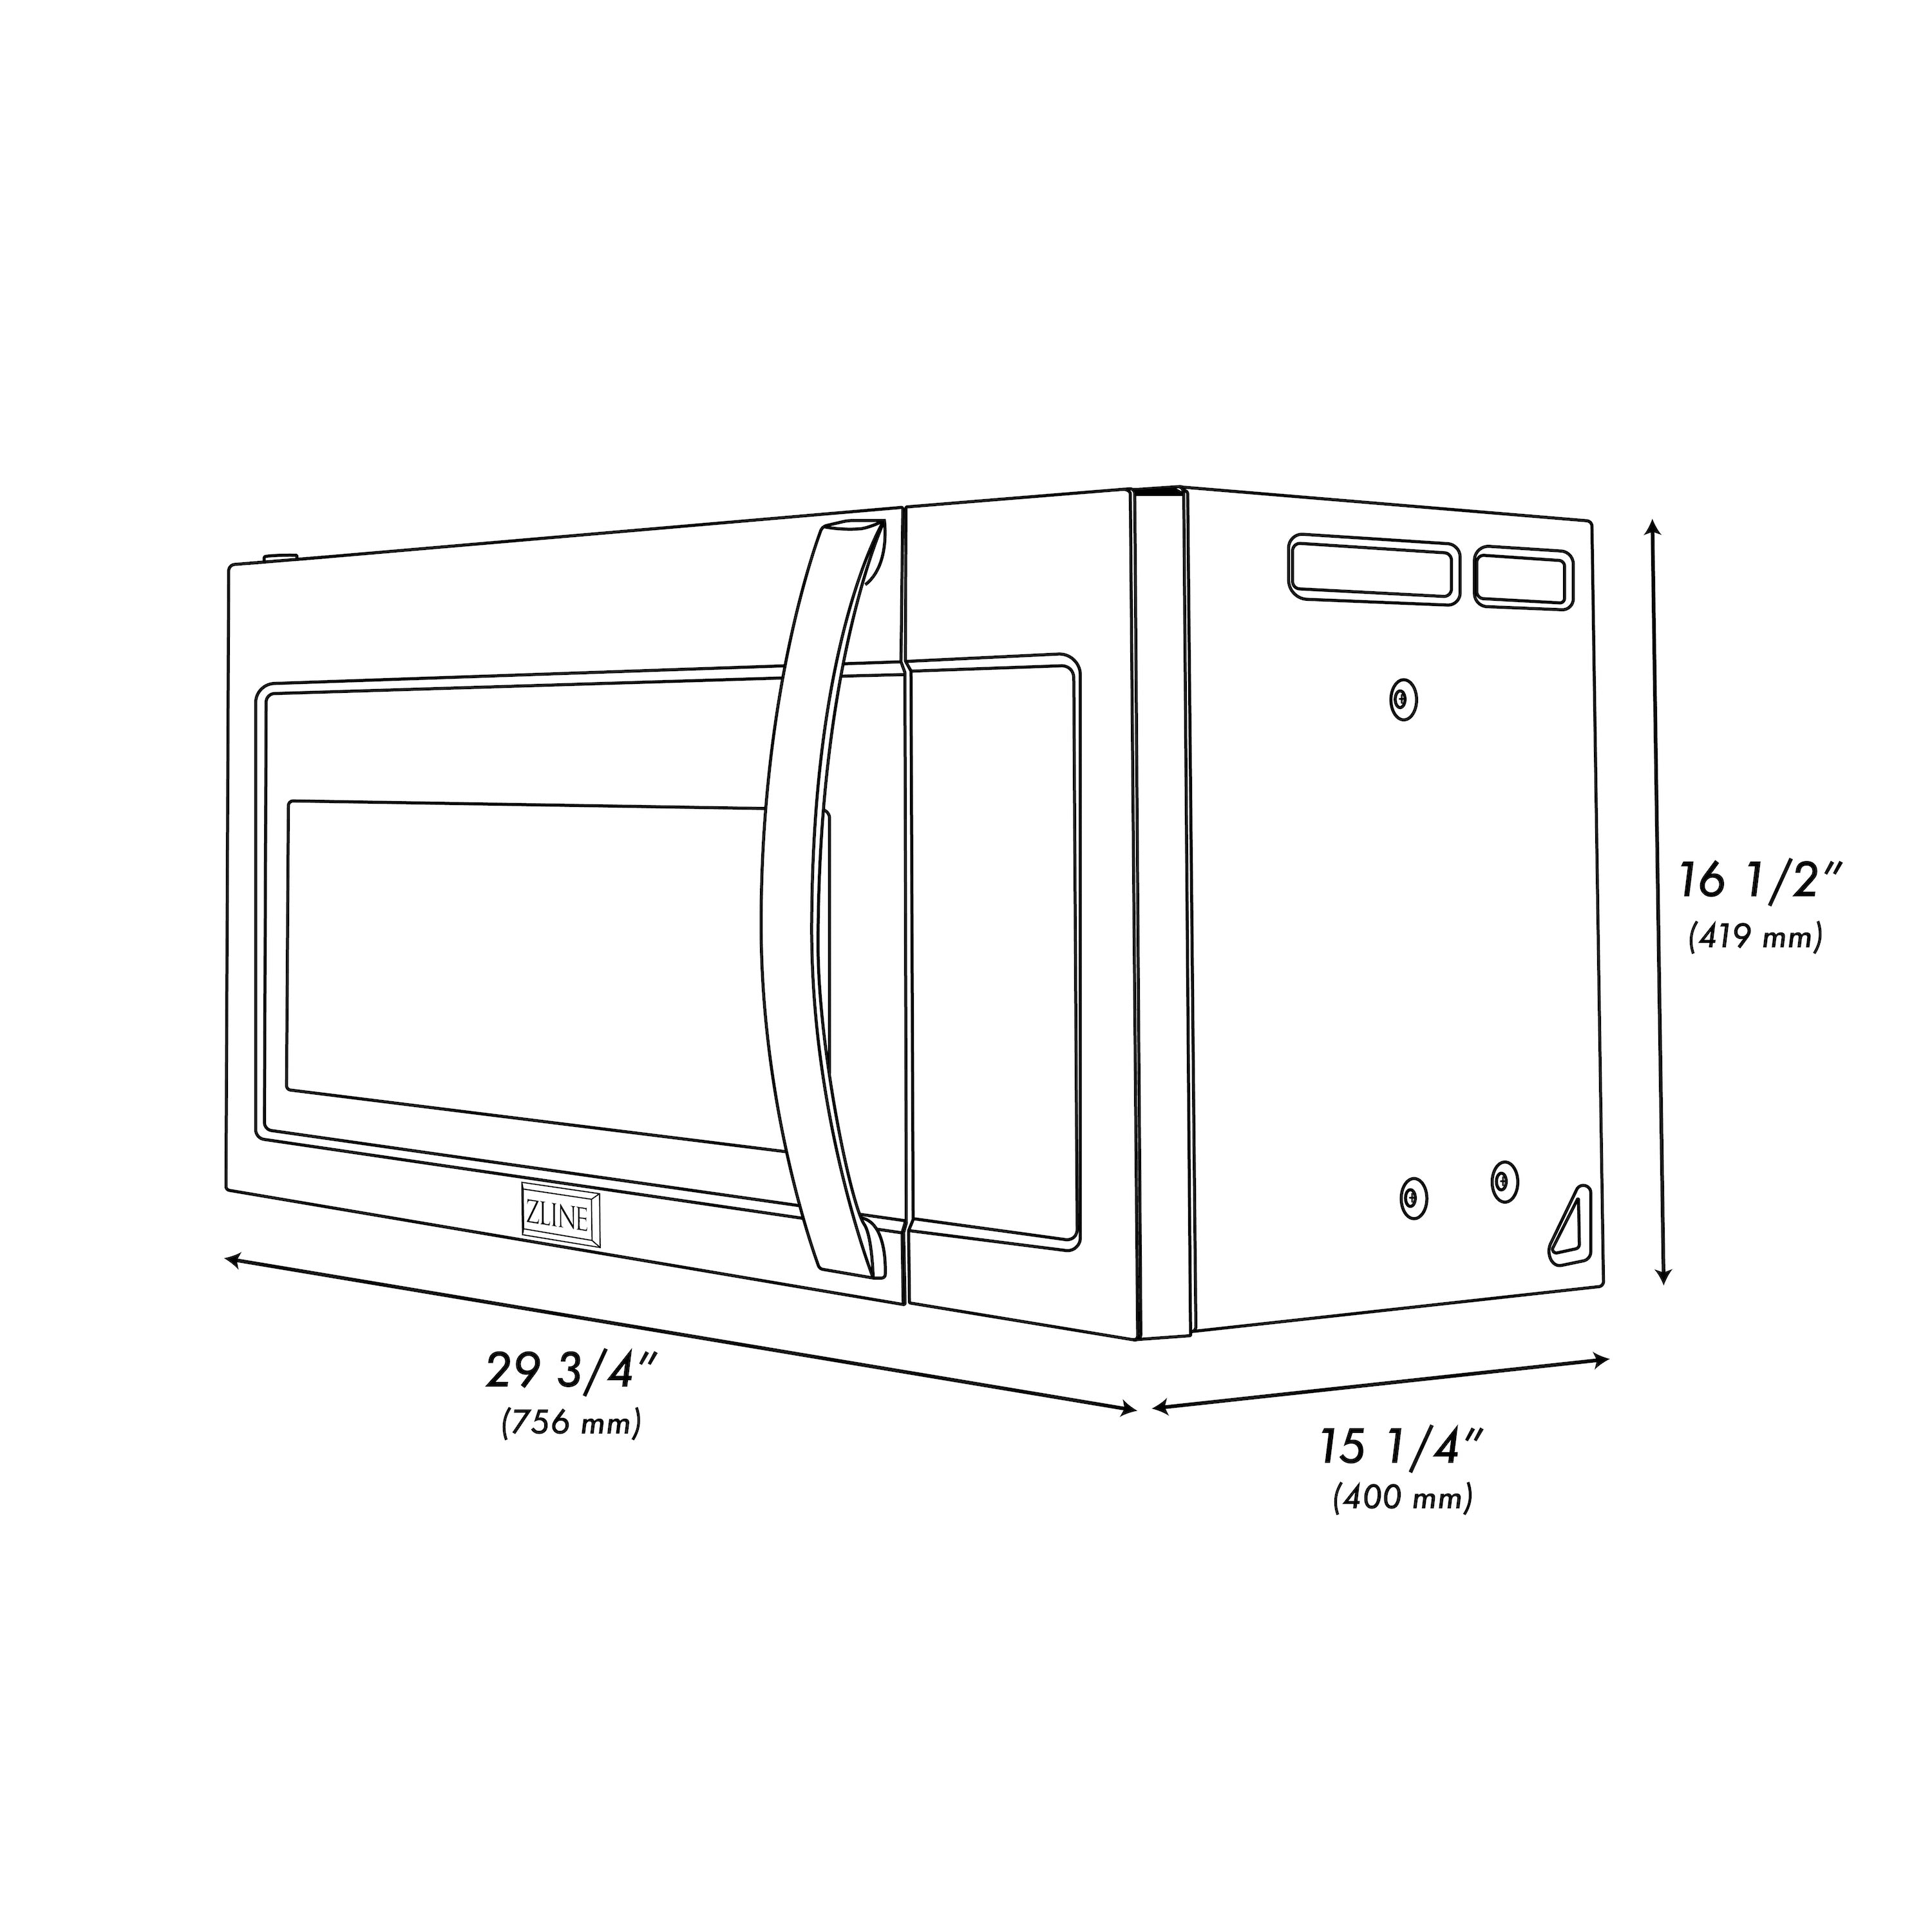 ZLINE 1.5 cu. ft. Over the Range Convection Microwave Oven in Black Stainless Steel with Modern Handle and Sensor Cooking